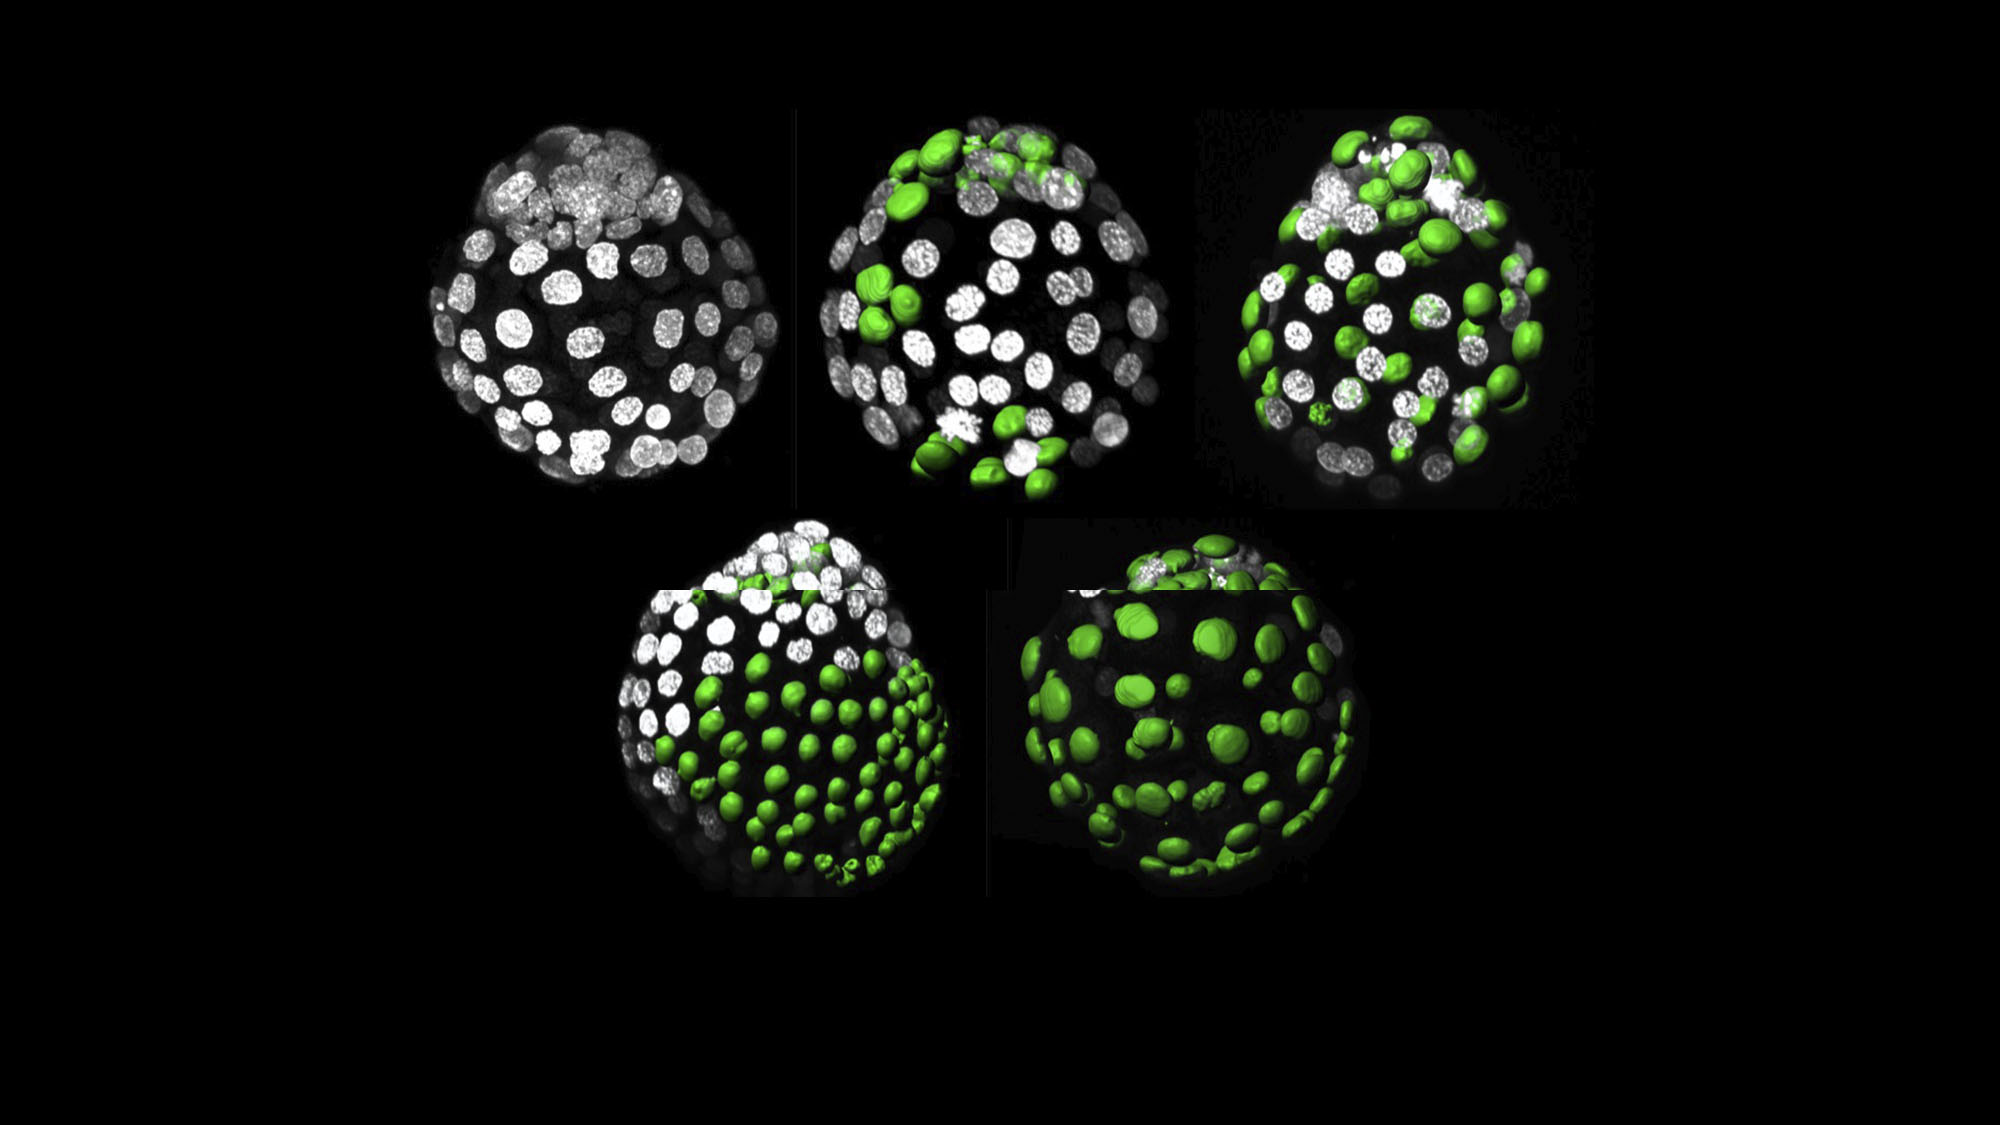 Images of mouse embryos with different cell types marked in different colors. From Saiz N. et al.